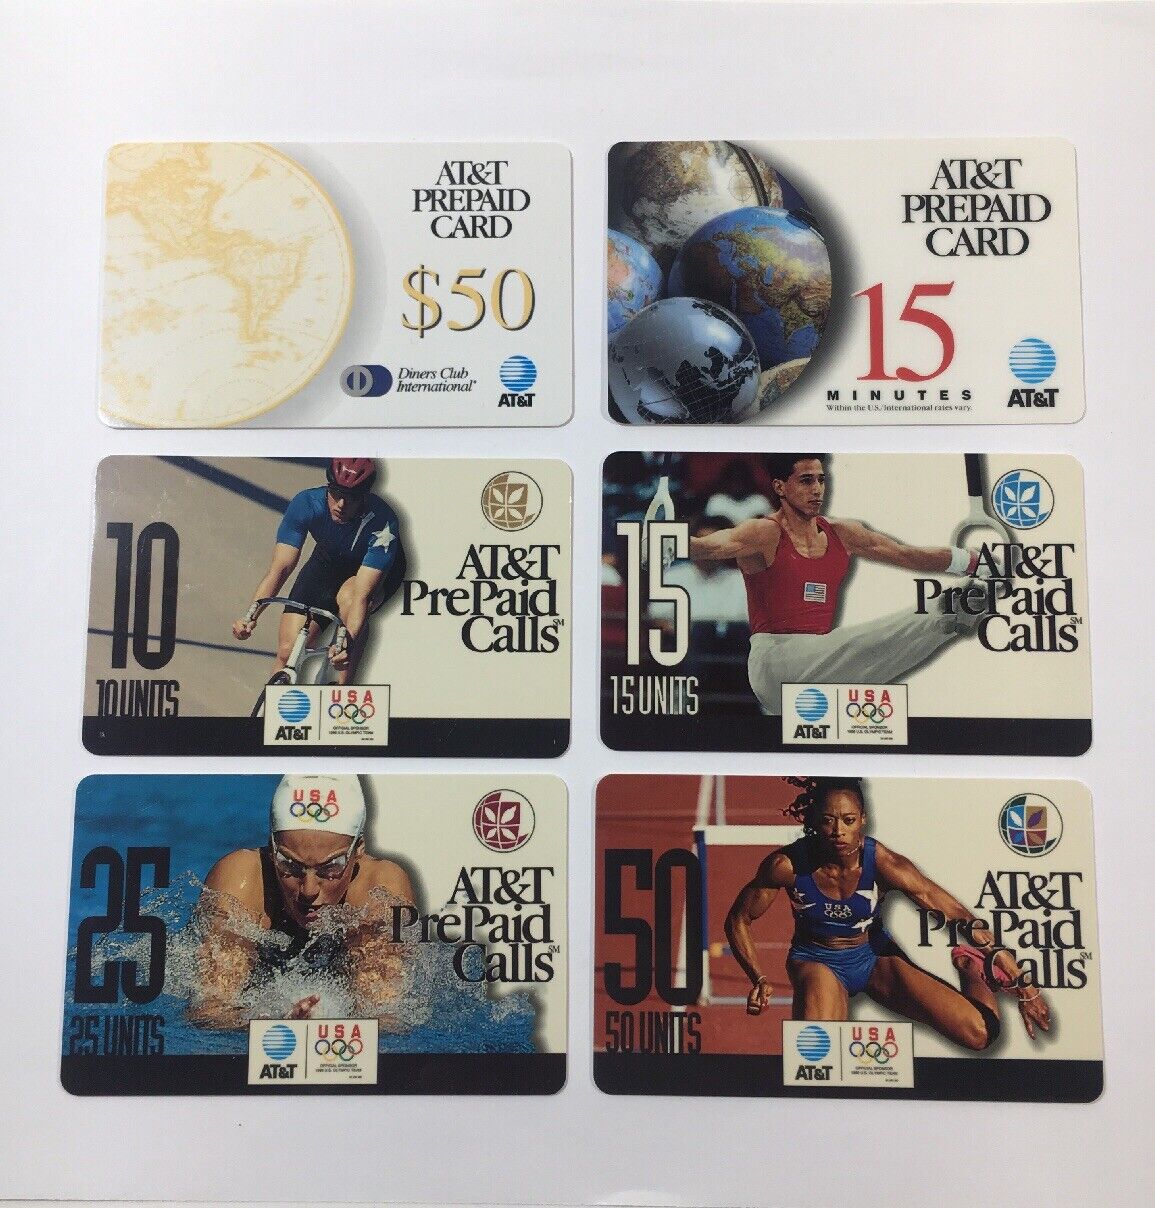 6 AT&T Prepaid Phone Cards 1996 Olympics Diners Club Rare (7181)